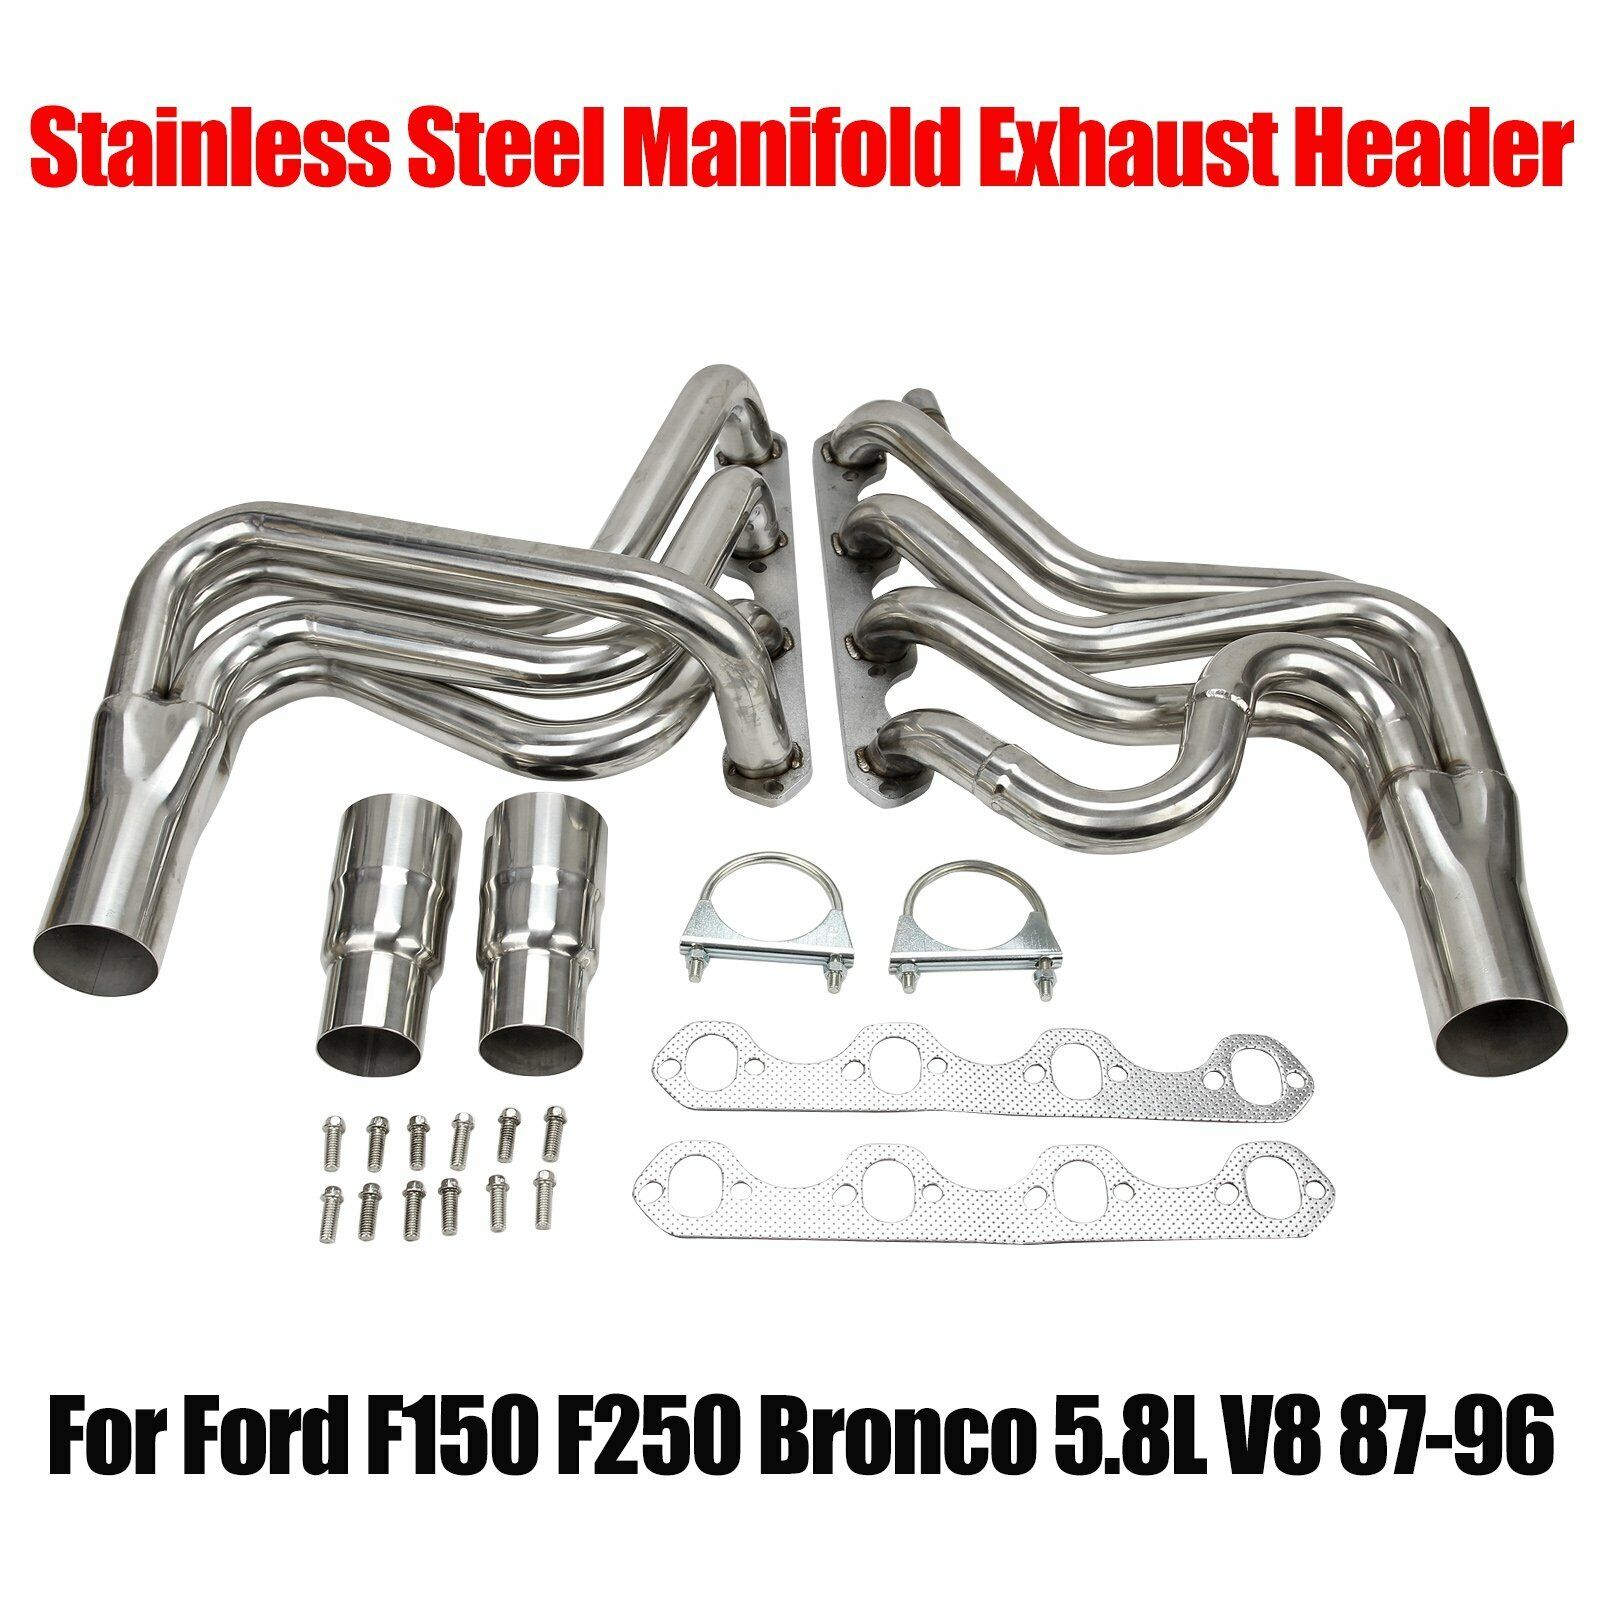 Fits Ford F150 F250 Bronco 5.8L V8 Stainless Steel Manifold Exhaust Header 87-96